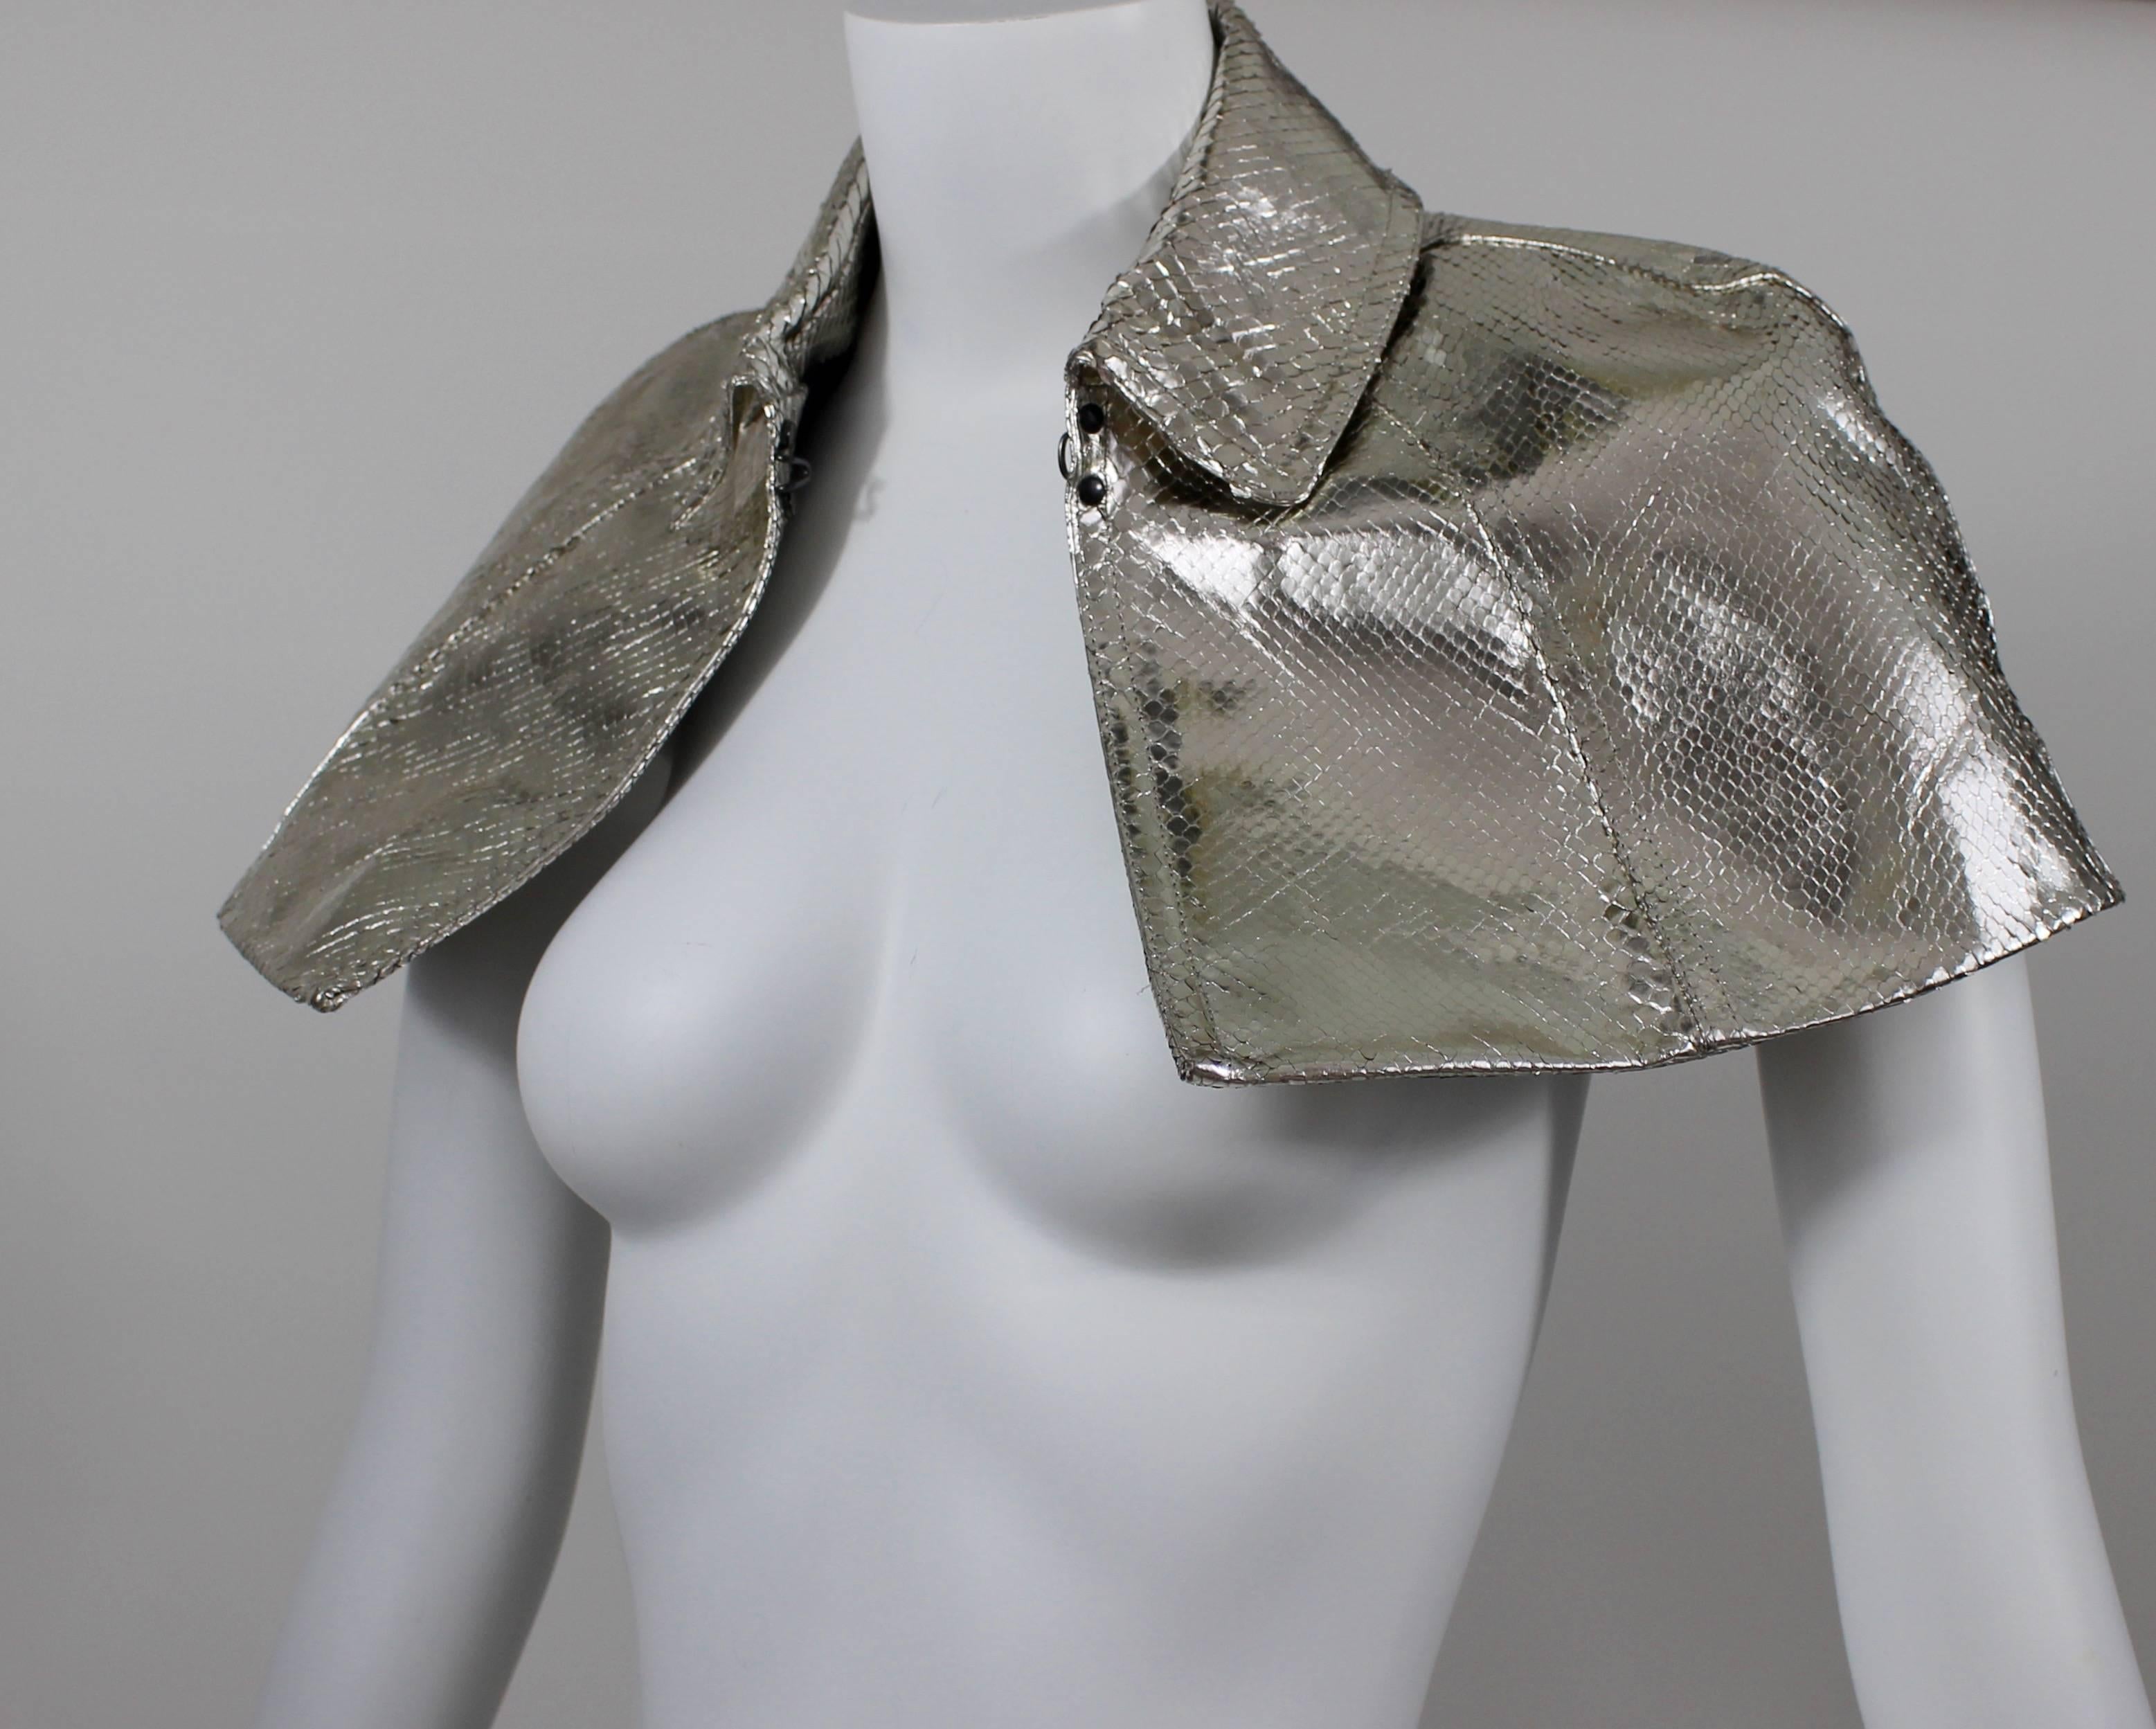 Burberry Cropped Silver metallic Python Cape Spring 2013 Runway In Excellent Condition For Sale In Boca Raton, FL